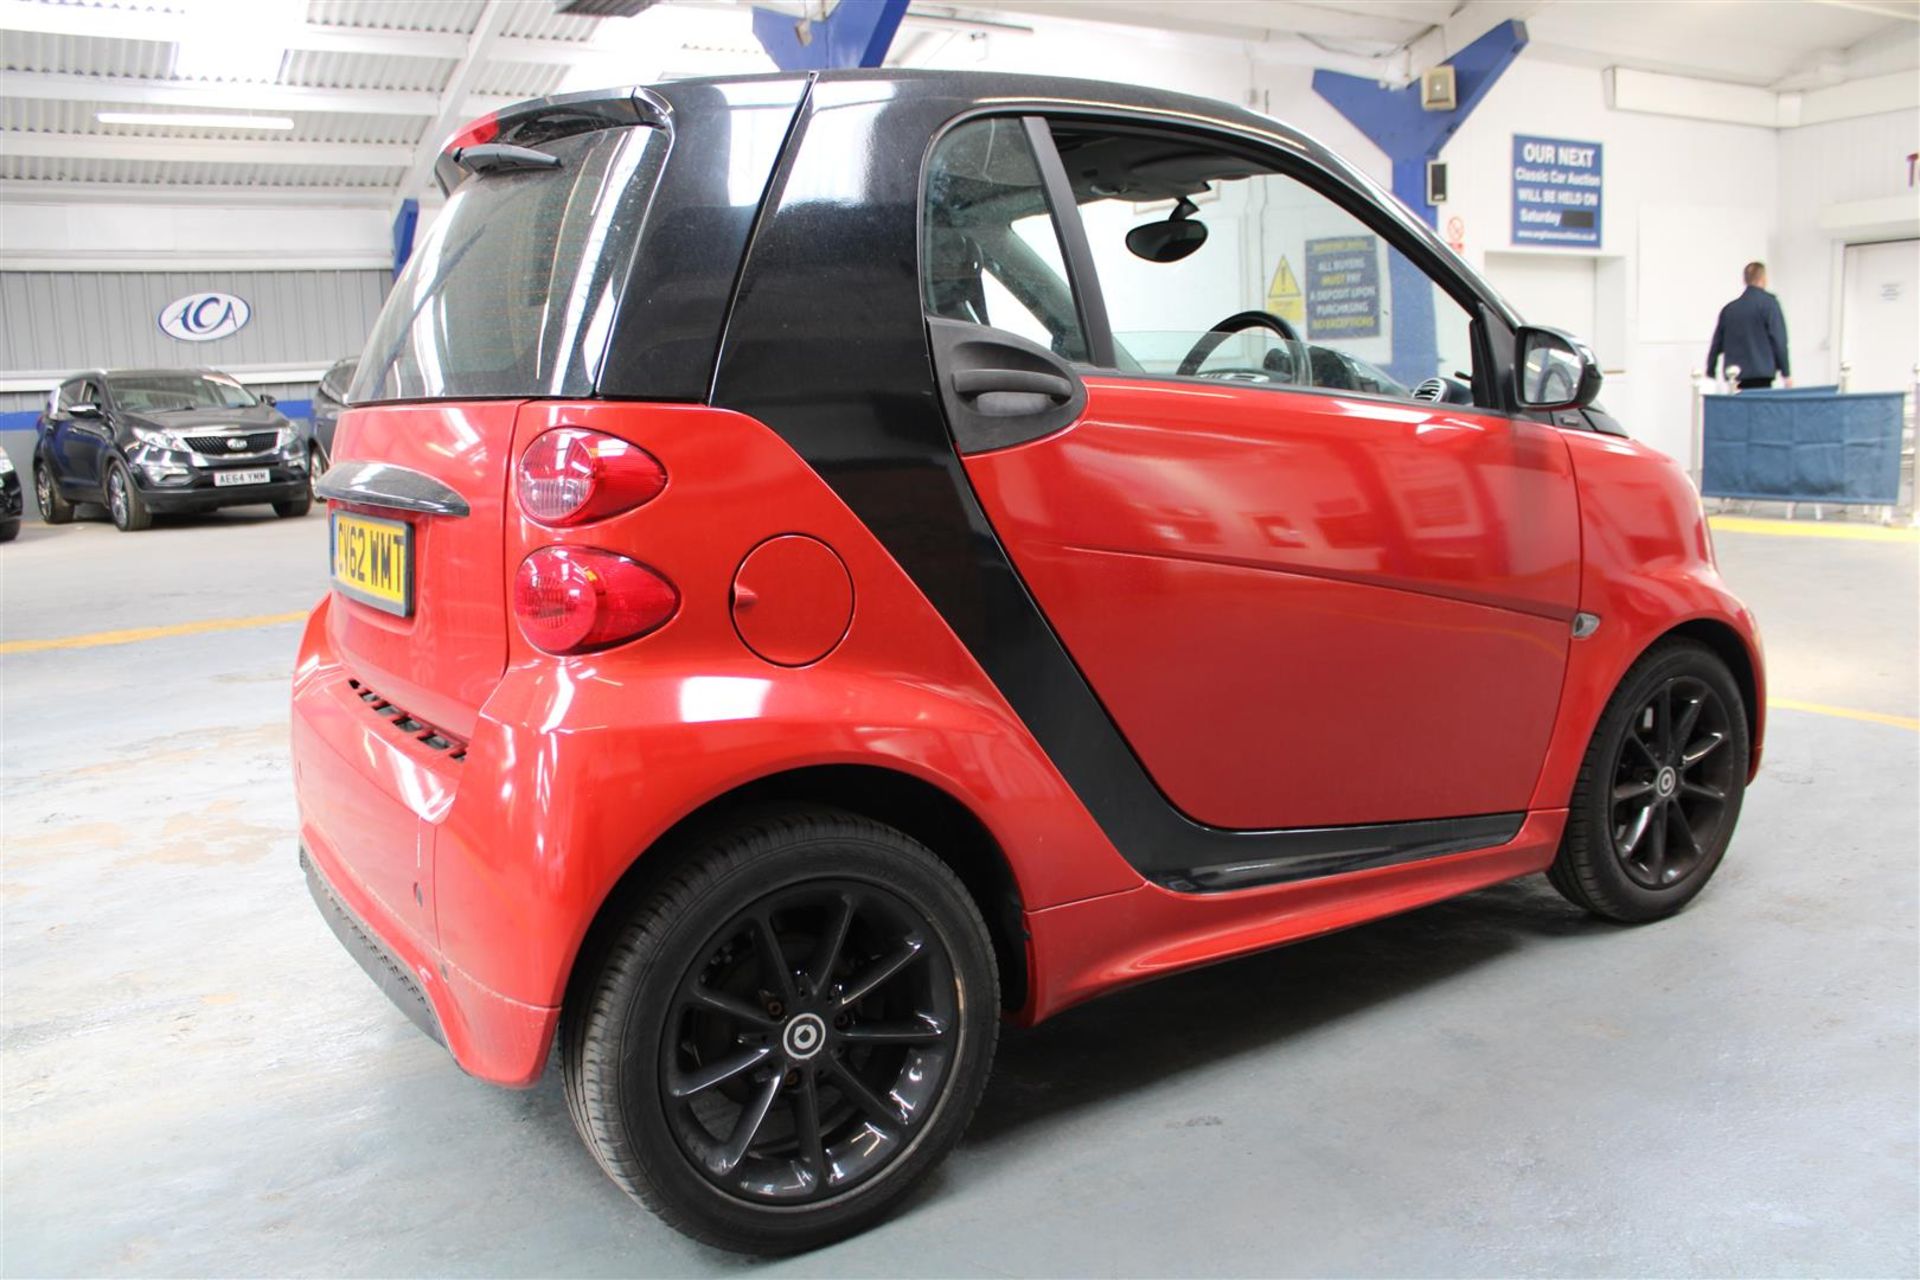 62 12 Smart Fortwo Passion MHD - Image 23 of 27